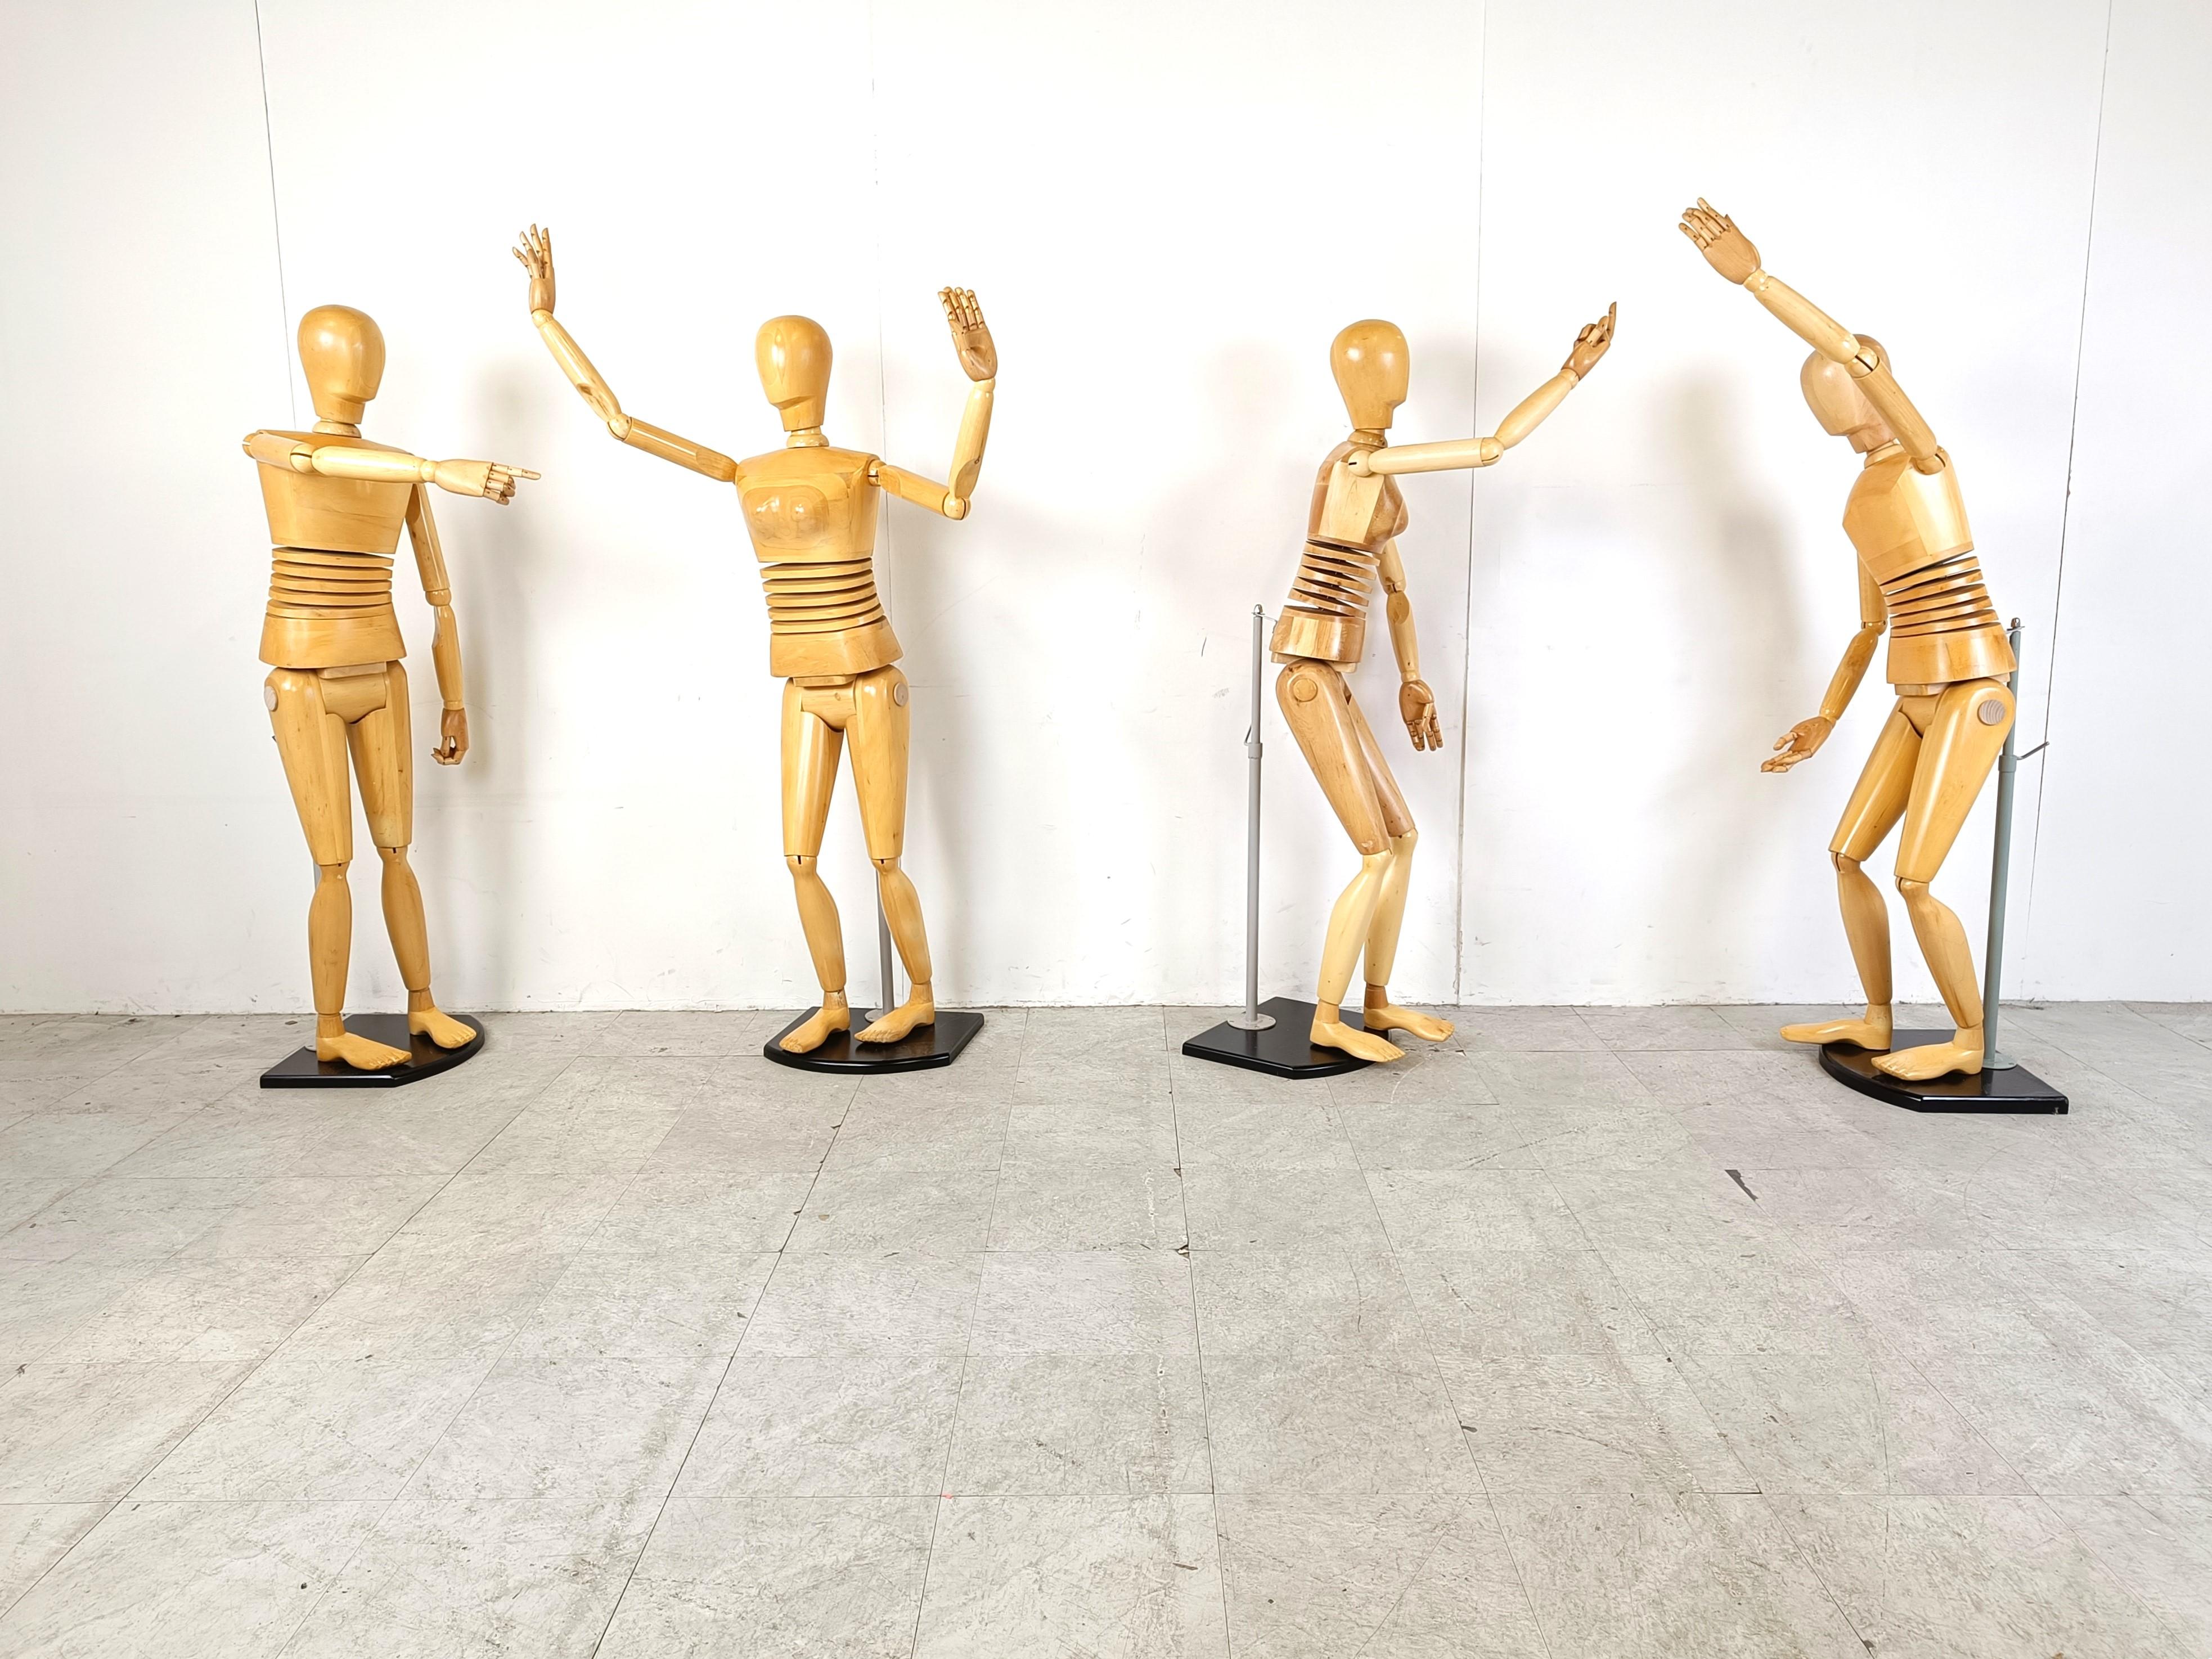 High quality pine wood articulated artistic Lay Figures.

These life size mannequins are made with great care and have a lot of positioning possibilities. (as displayed by our creative photographer)

What is remarkable, is the engineering around the